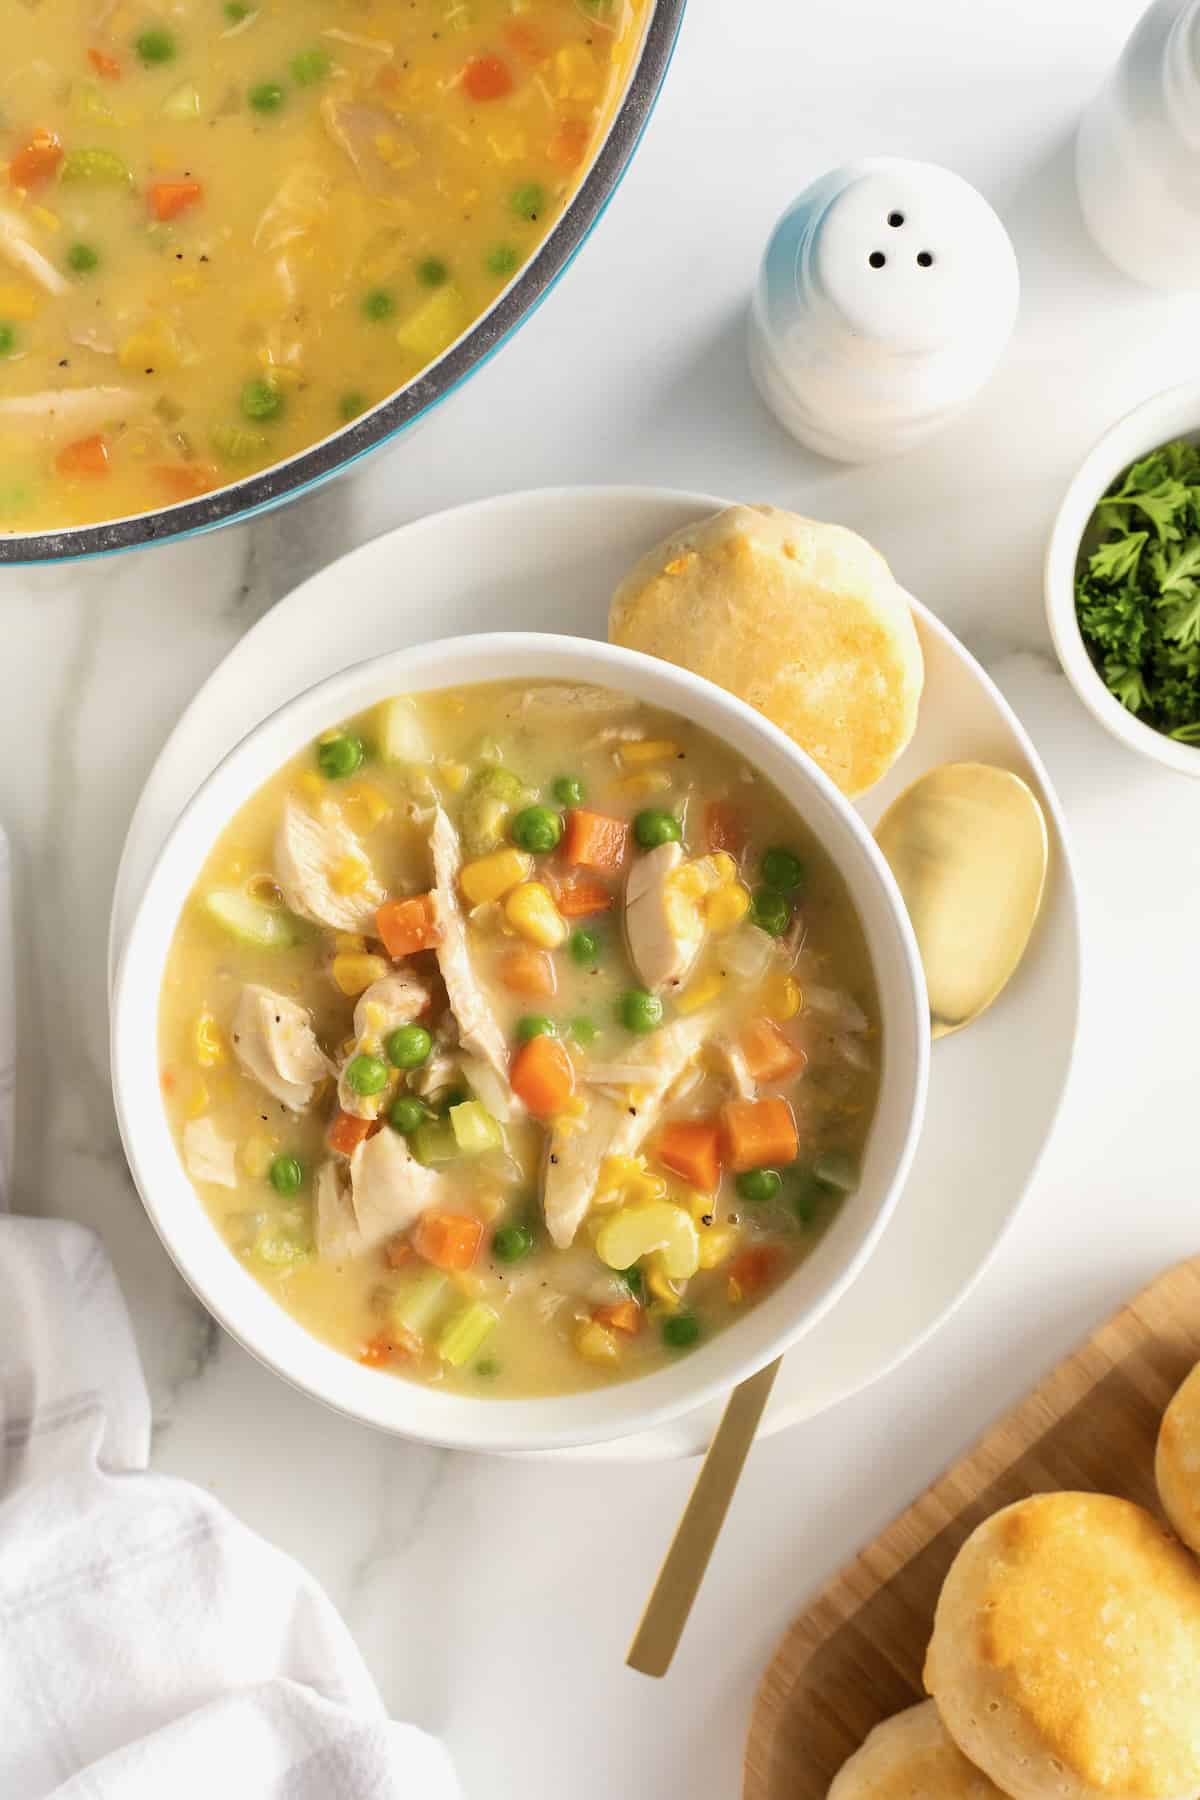 A while ceramic bowl of chicken pot pie soup on a white plate with a spoon. A biscuit is next to the bowl of chicken pot pie soup. There is a salt shaker to the upper right corner.